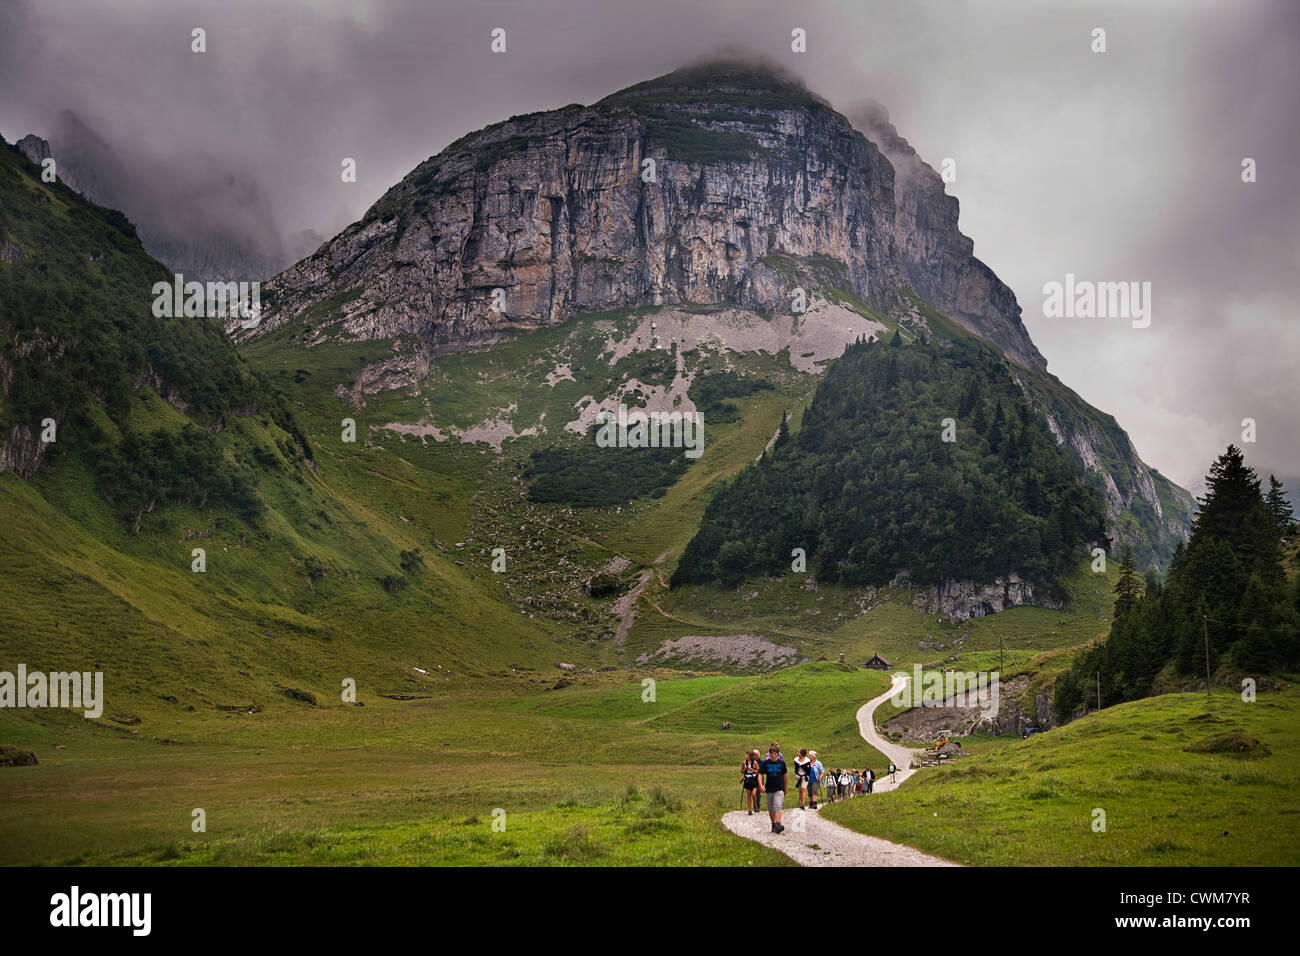 Europe. Switzerland. Alps. Engelberg. Tourist hikers in green valley. Low clouds over mountain. Stock Photo